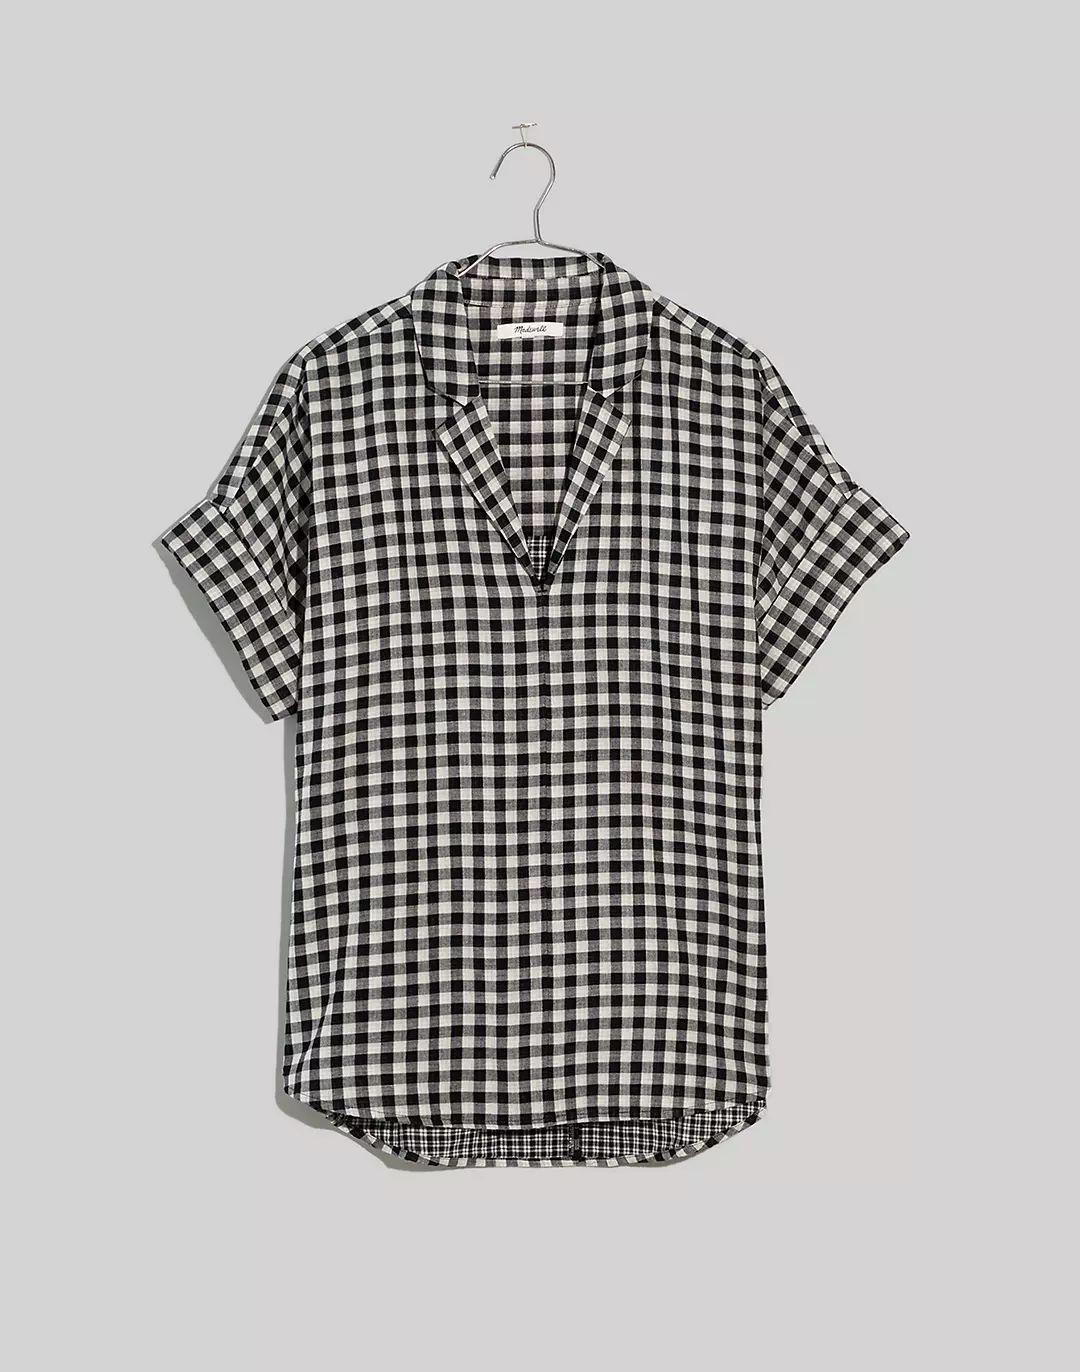 Swenson Popover Shirt in Double-Faced Gingham | Madewell